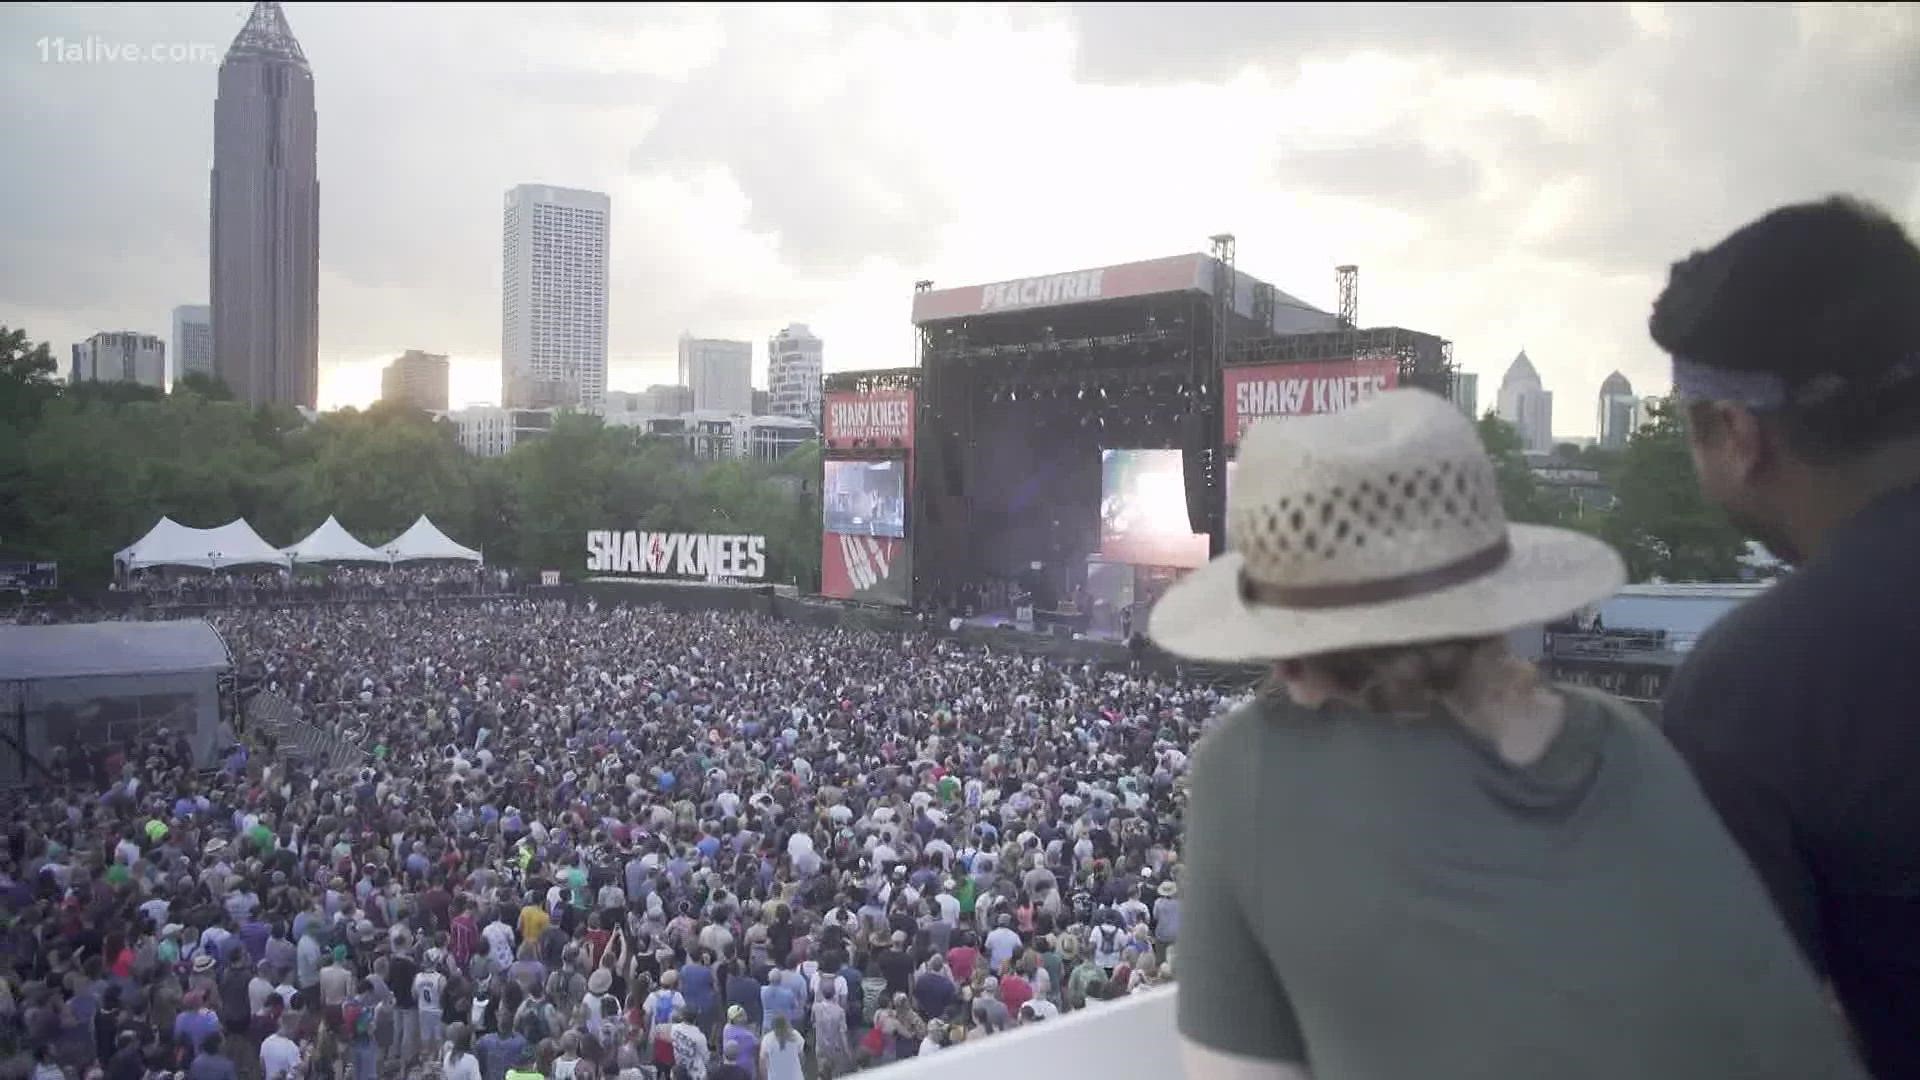 Since 2013, Shaky Knees has been bringing indie and rock music to Atlanta in festival form.